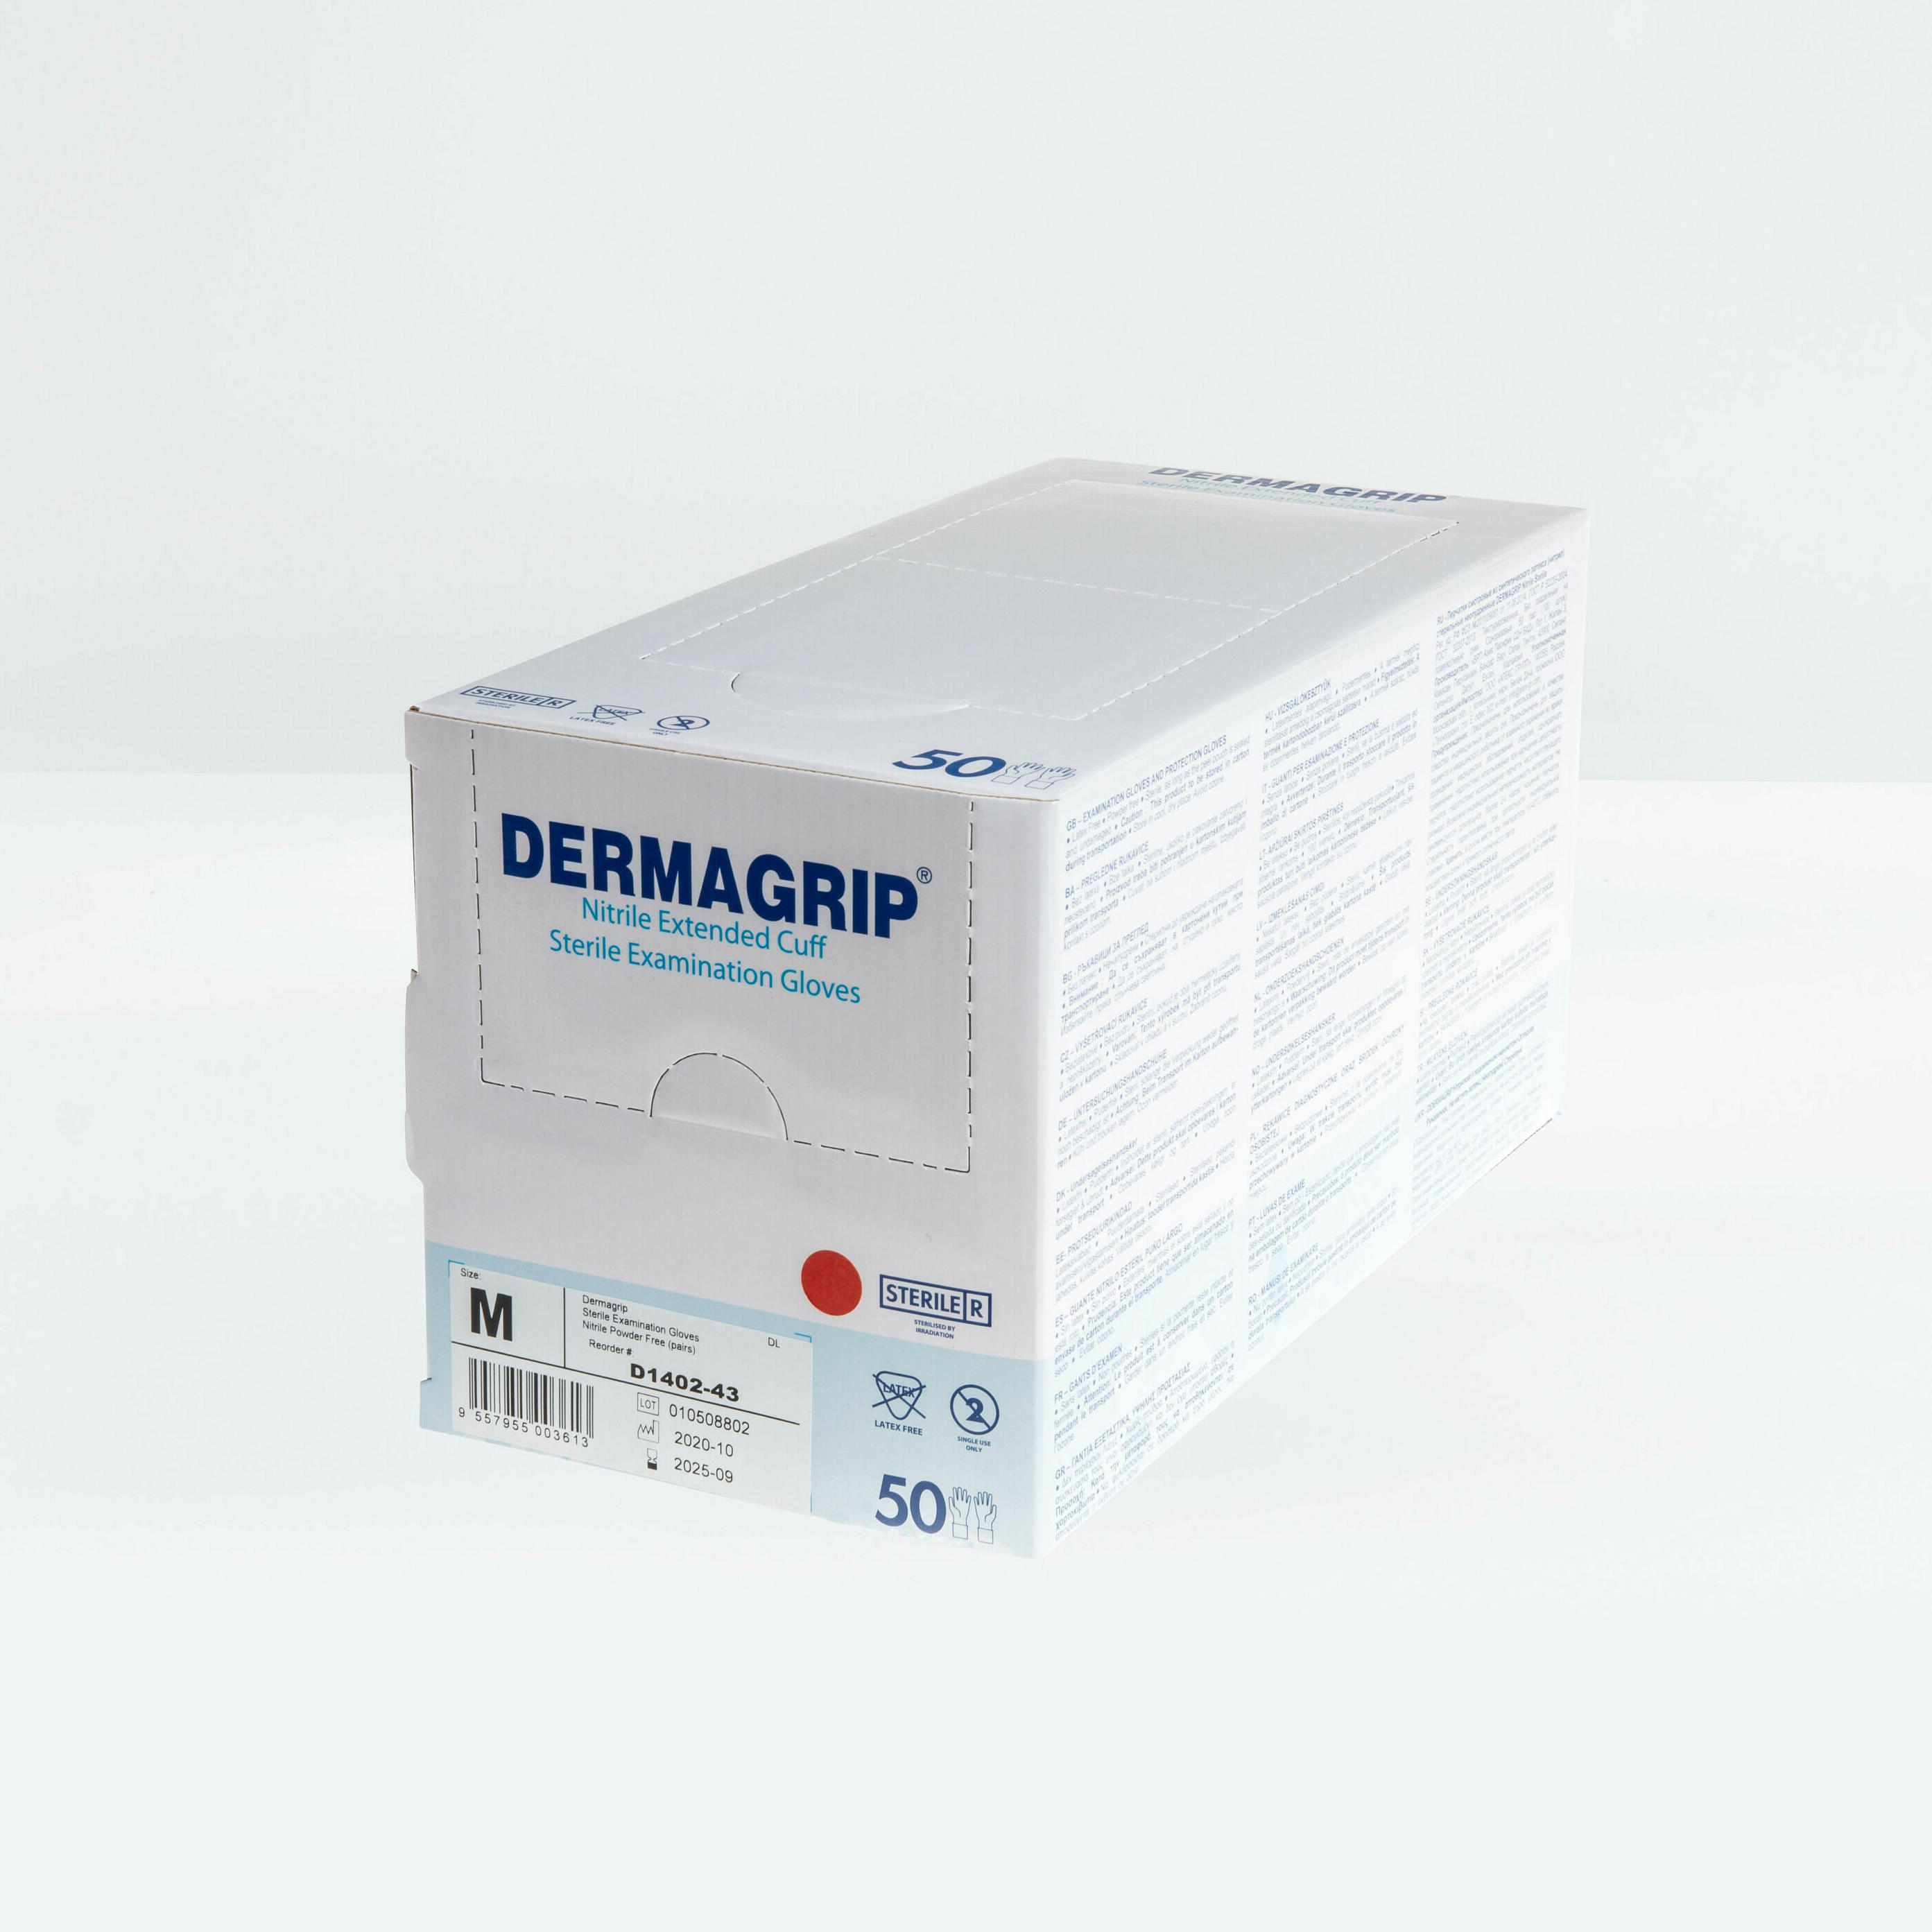 Dermagrip Extended cuff